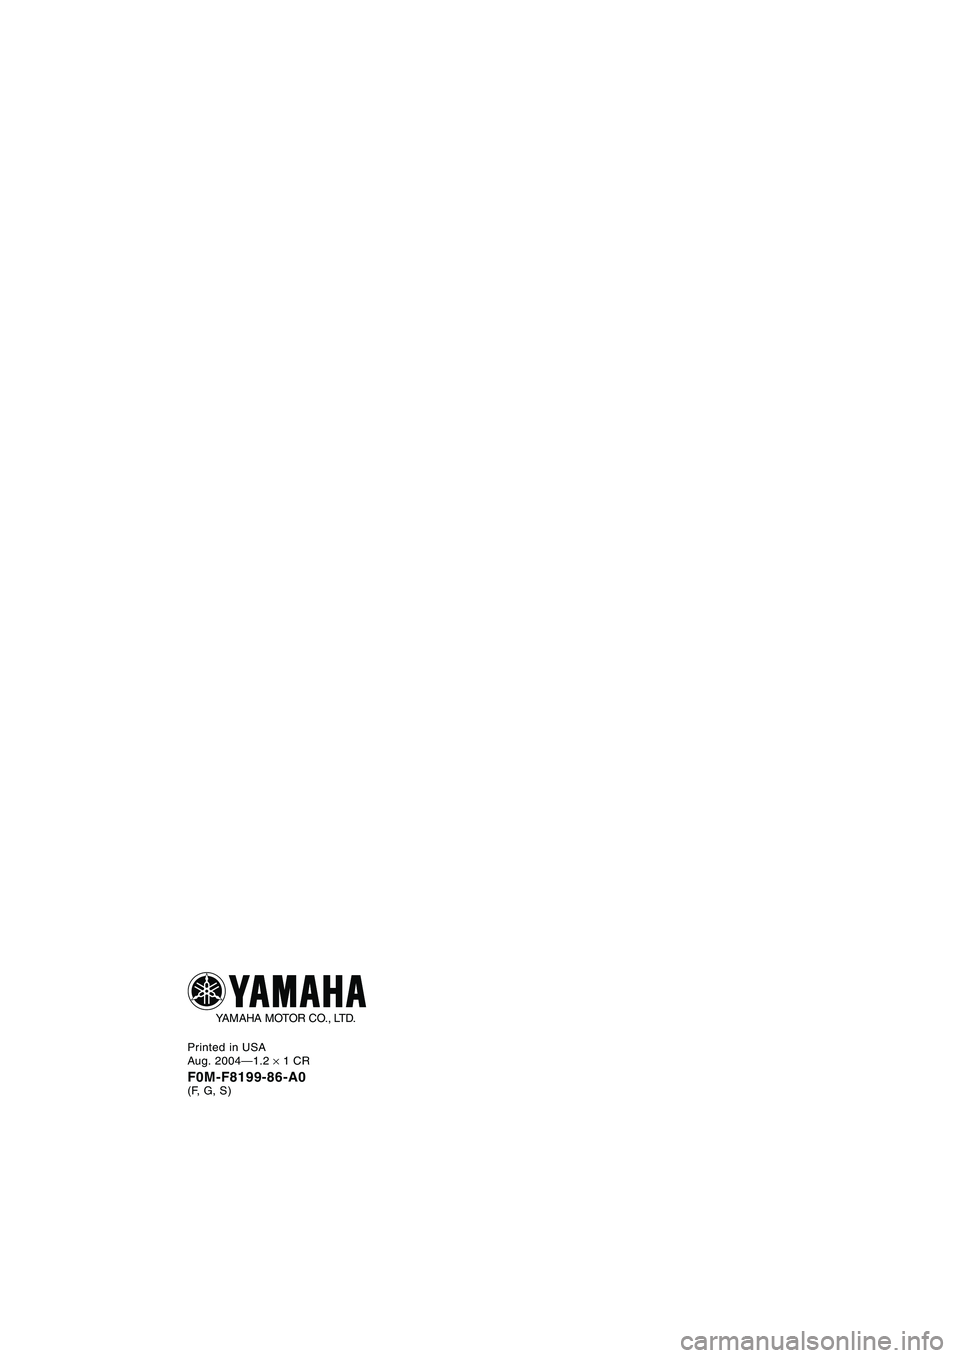 YAMAHA XL 700 2005  Manuale de Empleo (in Spanish) Printed in USA
Aug. 2004—1.2 × 1 CR
F0M-F8199-86-A0(F, G, S)
YAMAHA MOTOR CO., LTD.
A_F0M80.book  Page 1  Friday, June 25, 2004  11:46 AM 